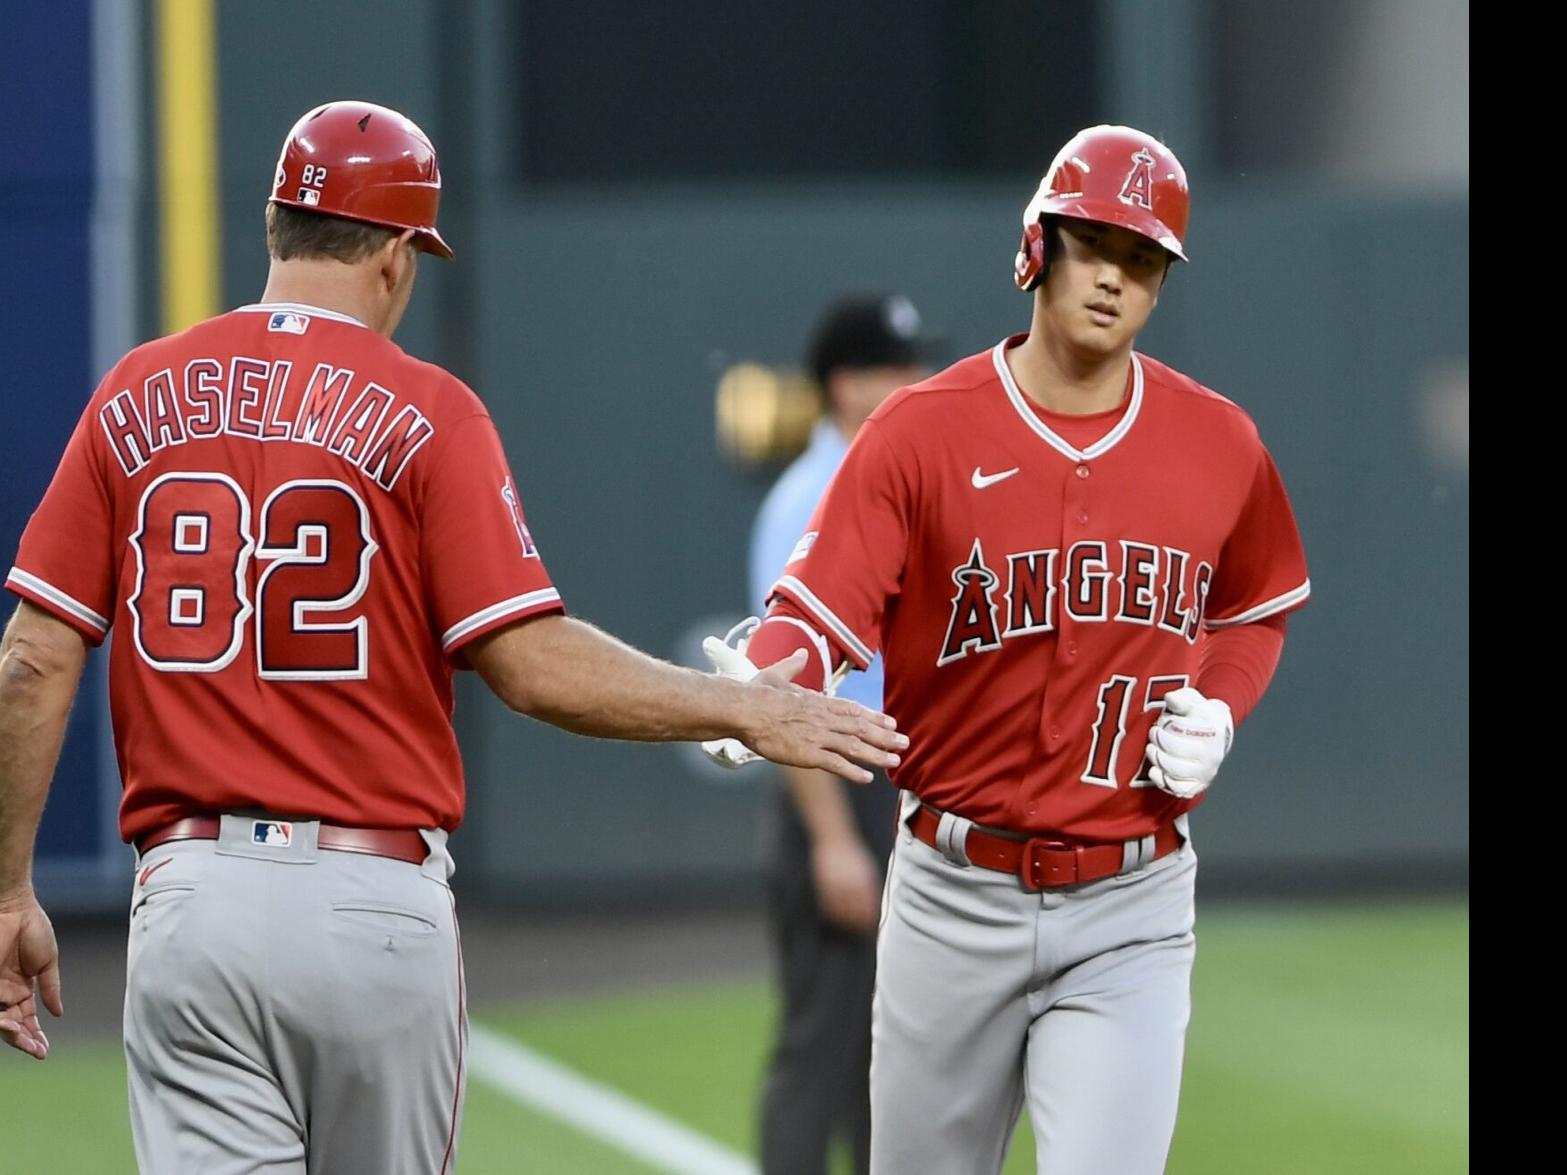 Shohei Ohtani aims for improvement even after MVP season for Angels